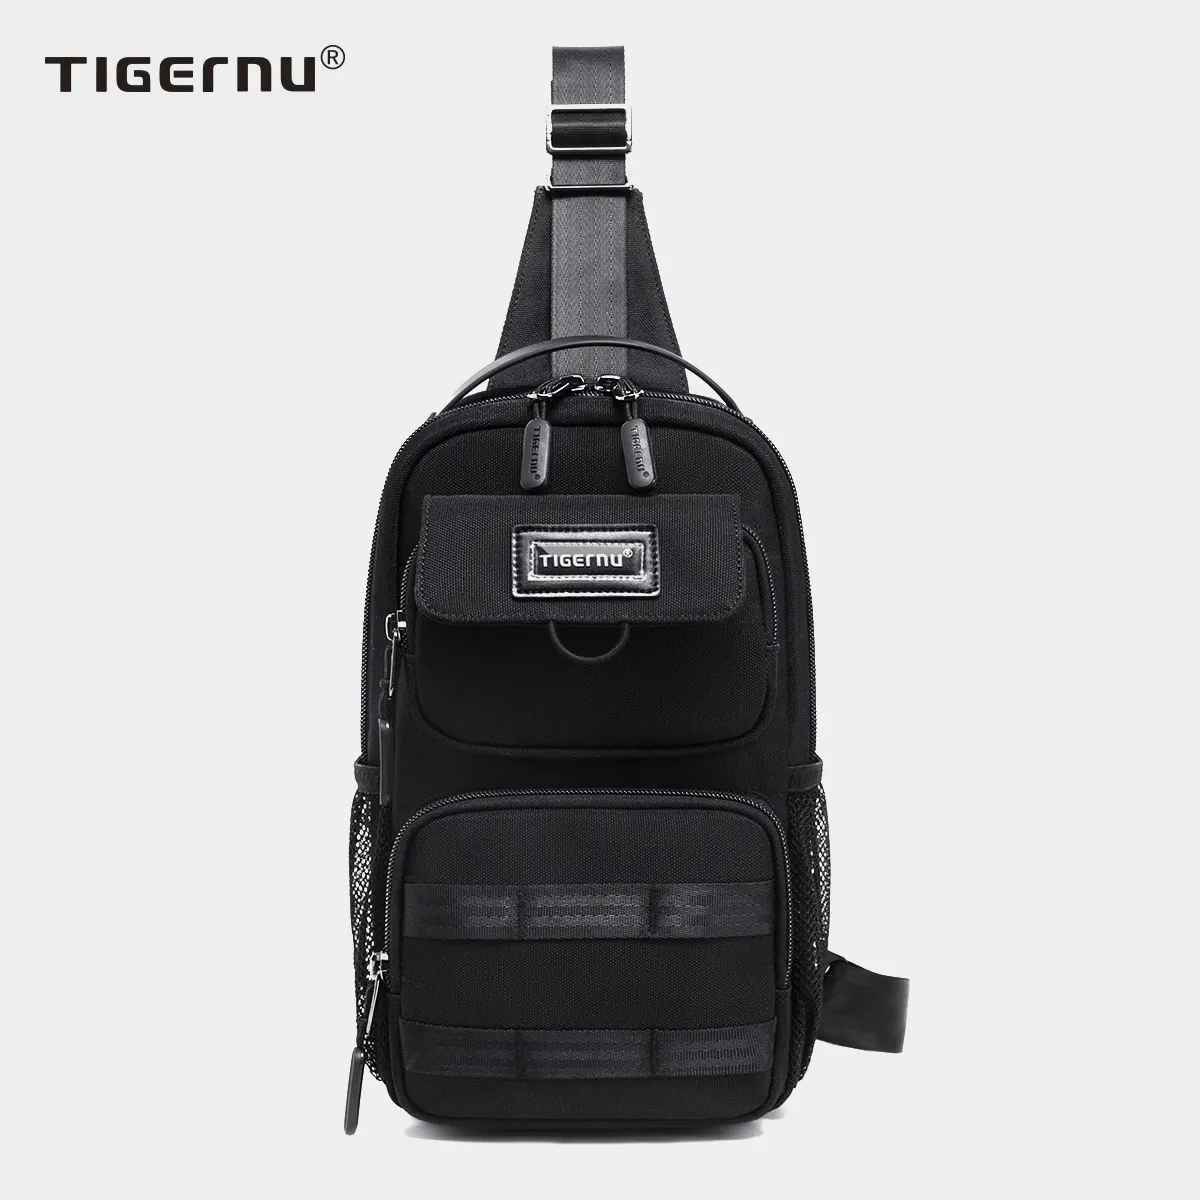 Tigernu T-S8219 for men sling bag casual style sports small bag for 7.9 inches tablet riding chest bag